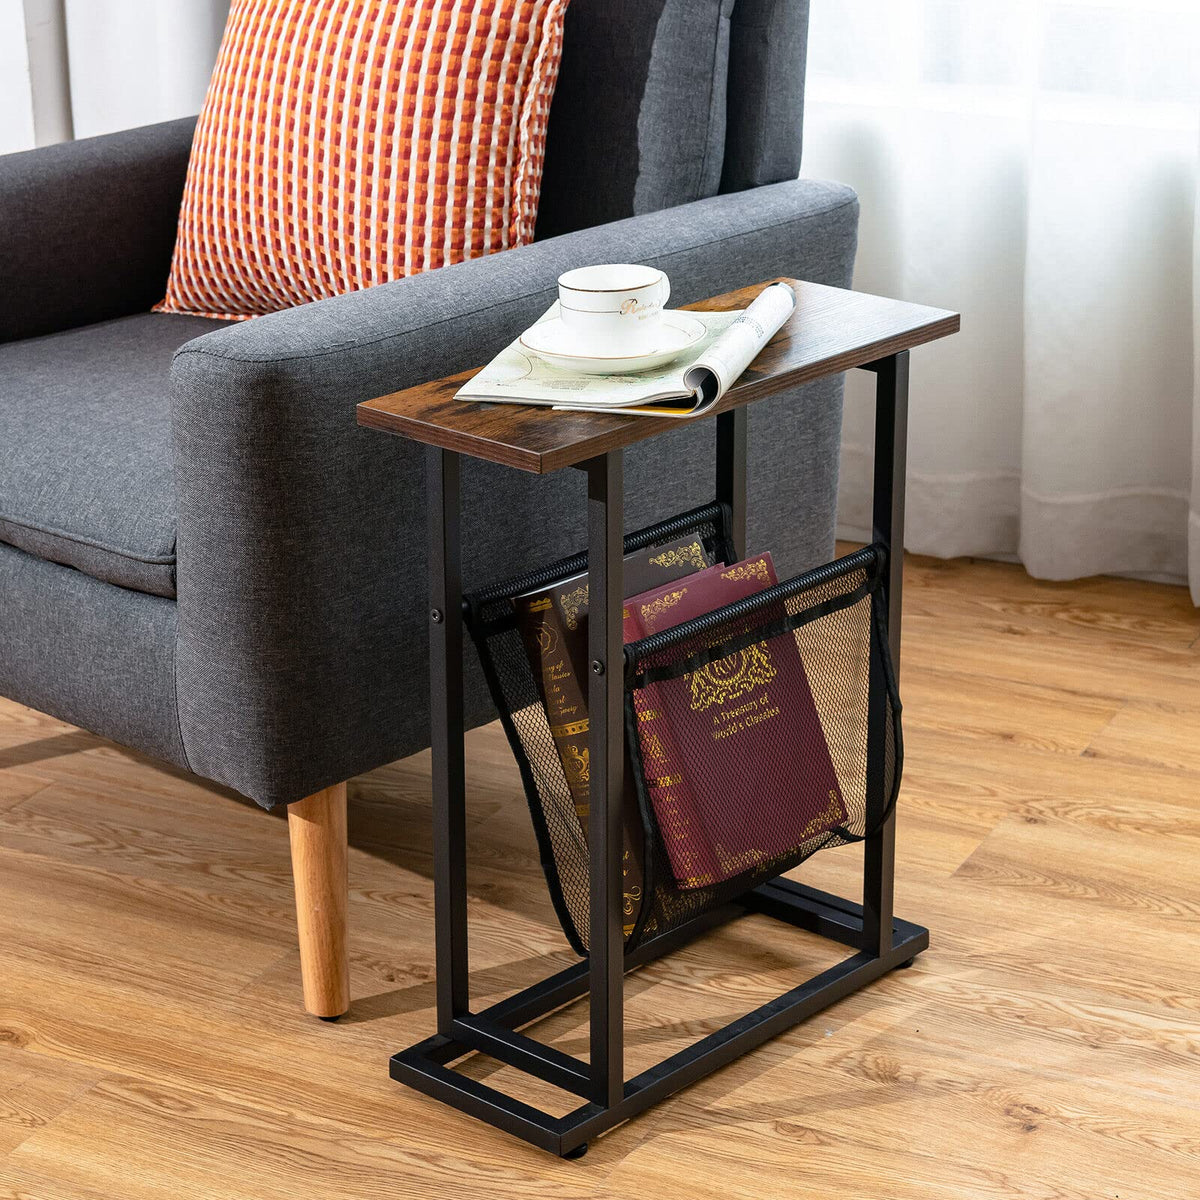 Giantex 2-Layer Rustic Side Table, Small Industrial End Table W/Magazine Holder, Wood Tabletop